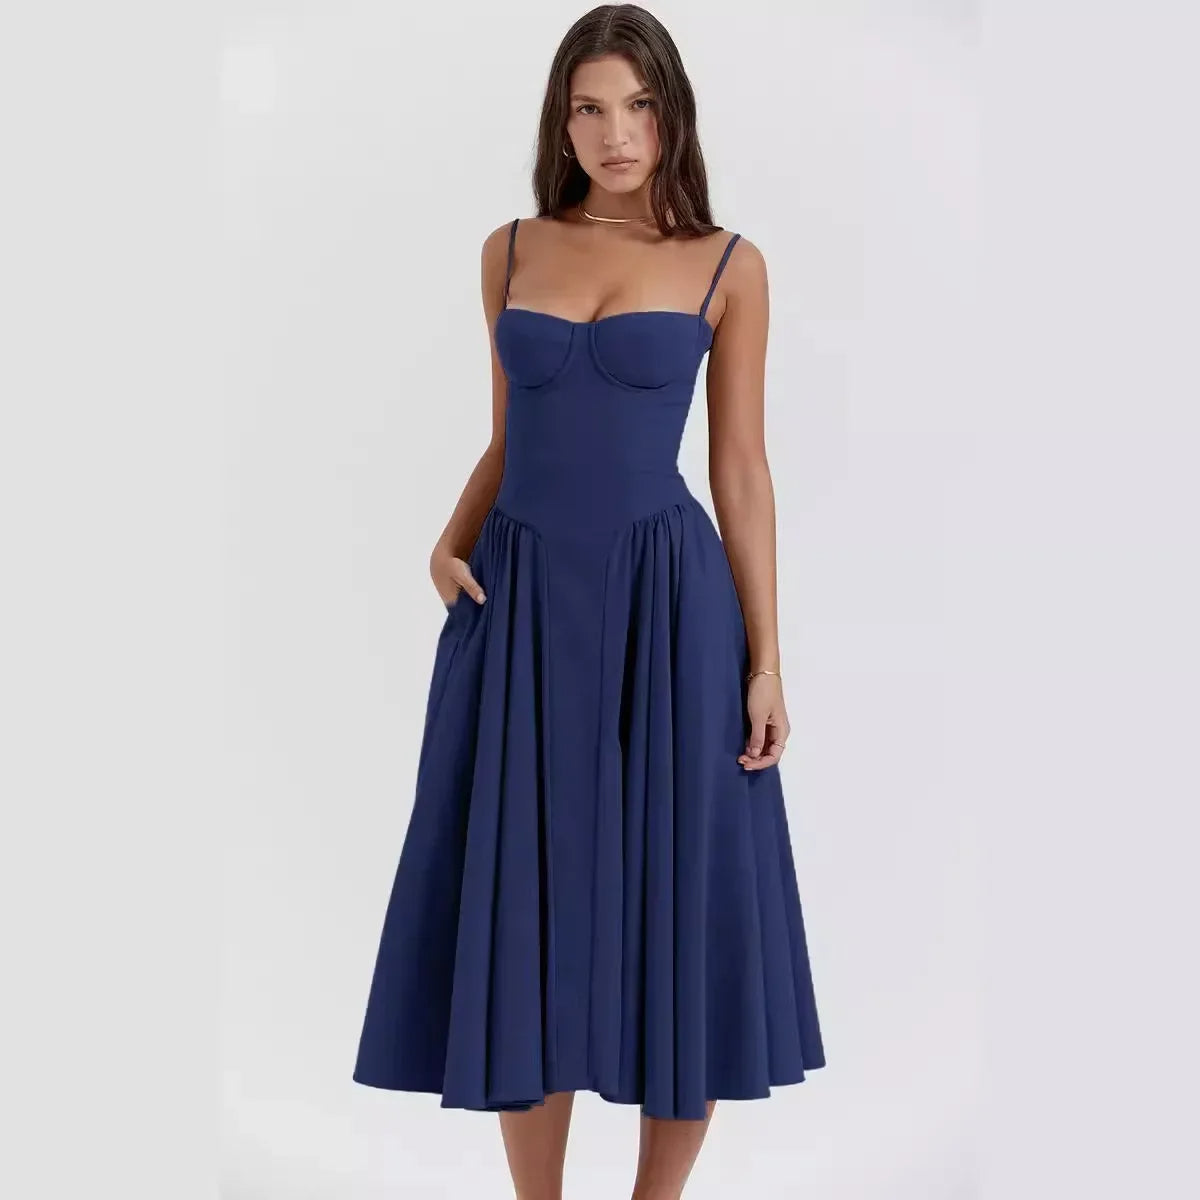 Chic Elegance Sleeveless A-Line Party Dress